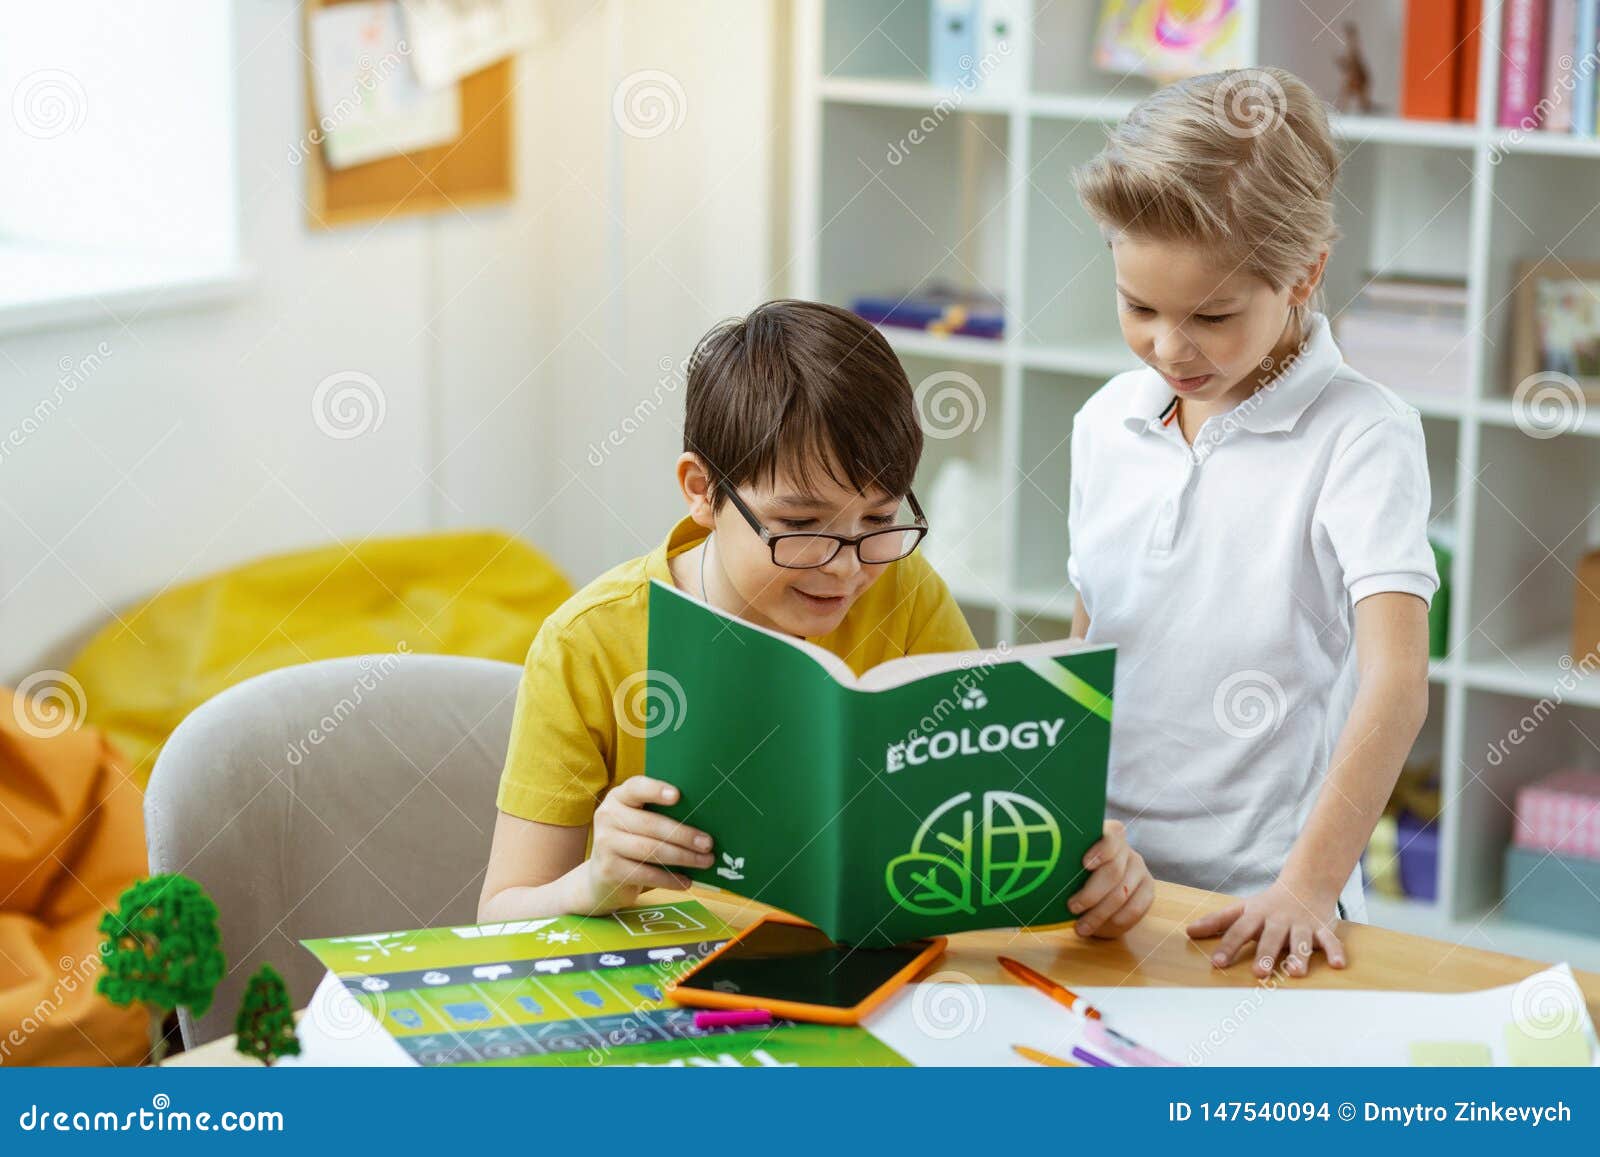 Reading about ecology. Read a book about ecology. Картинки read a book about ecology. Children Classroom фото ecology book.